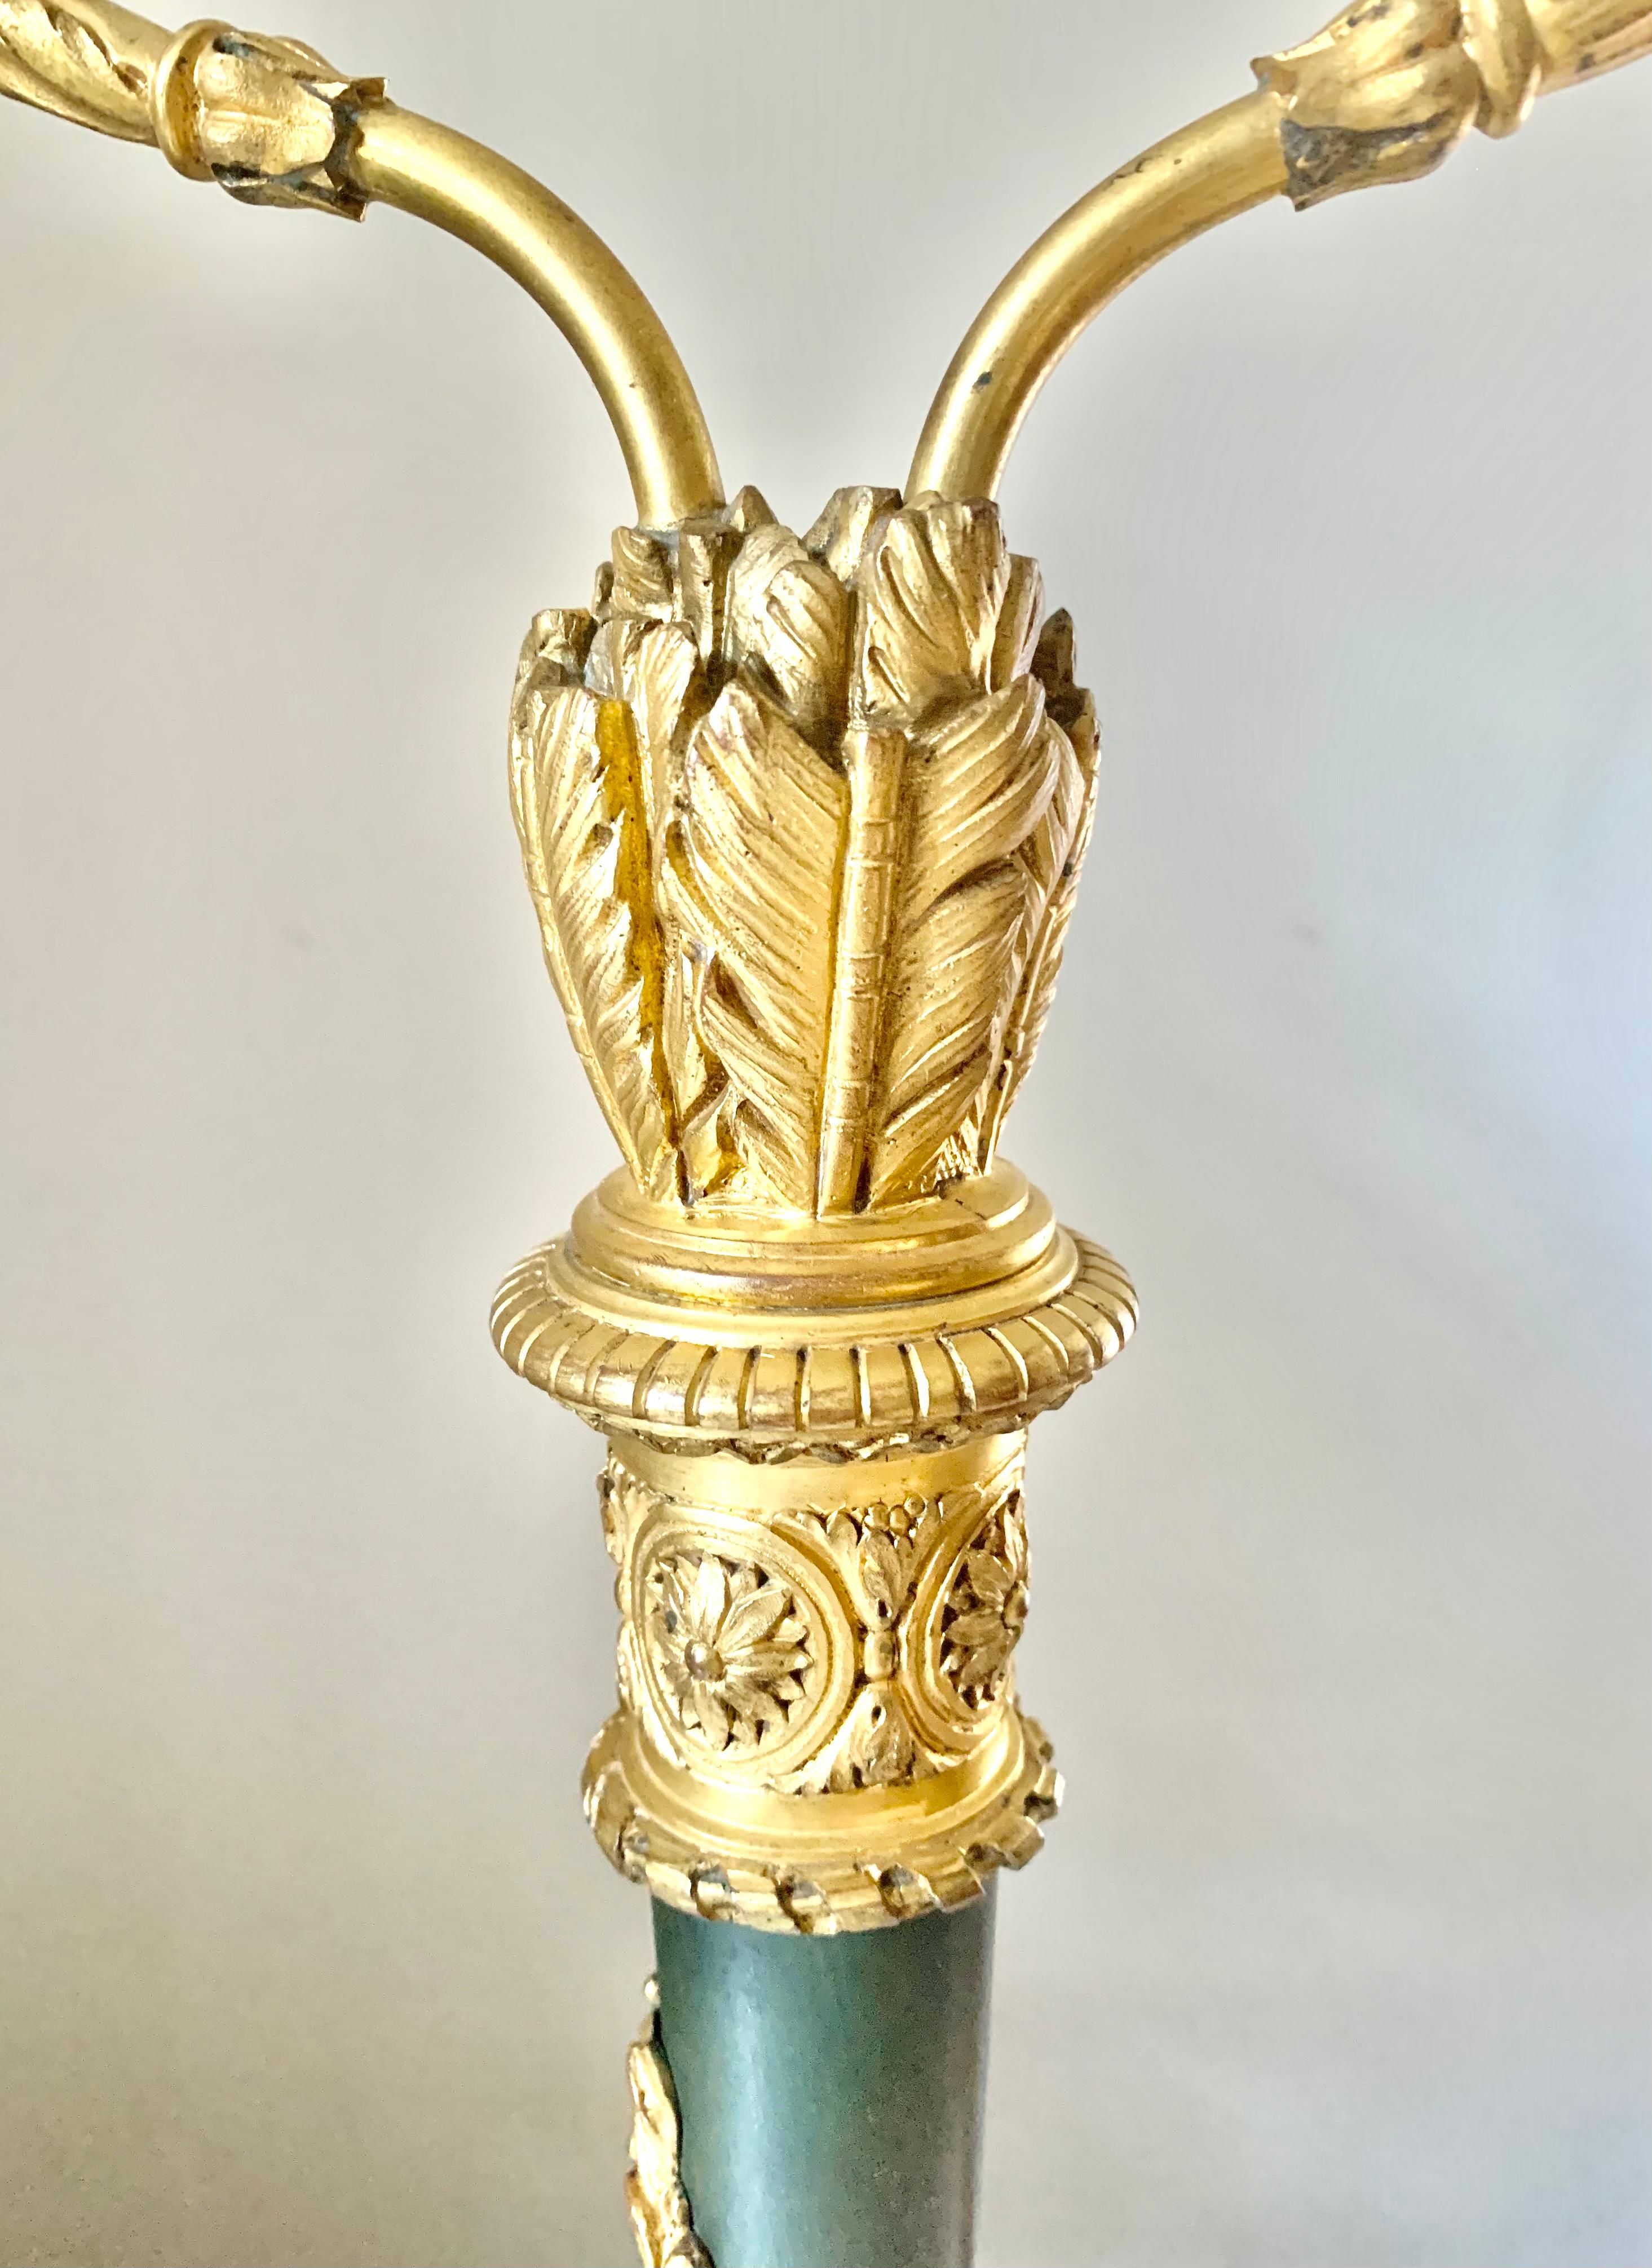 19th Century Fine Antique French Neoclassical Style Gilt and Patinated Bronze Desk Lamp For Sale